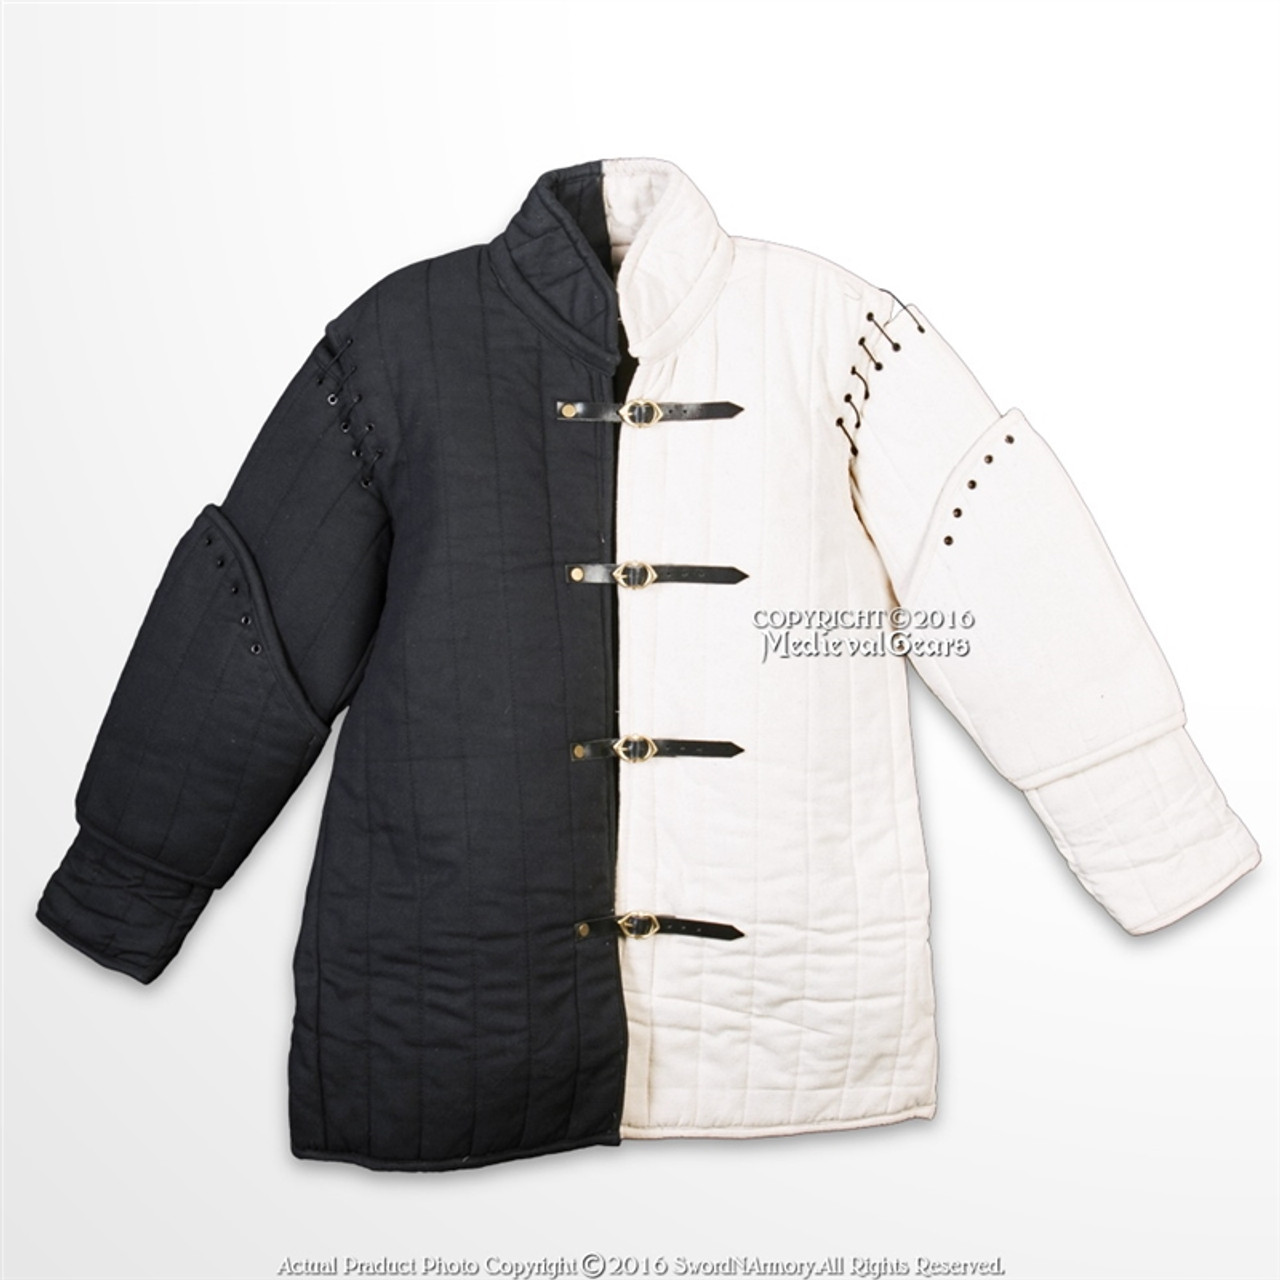 Buy Medieval Gambeson Type, Medieval Padded Armour,coat Jacket